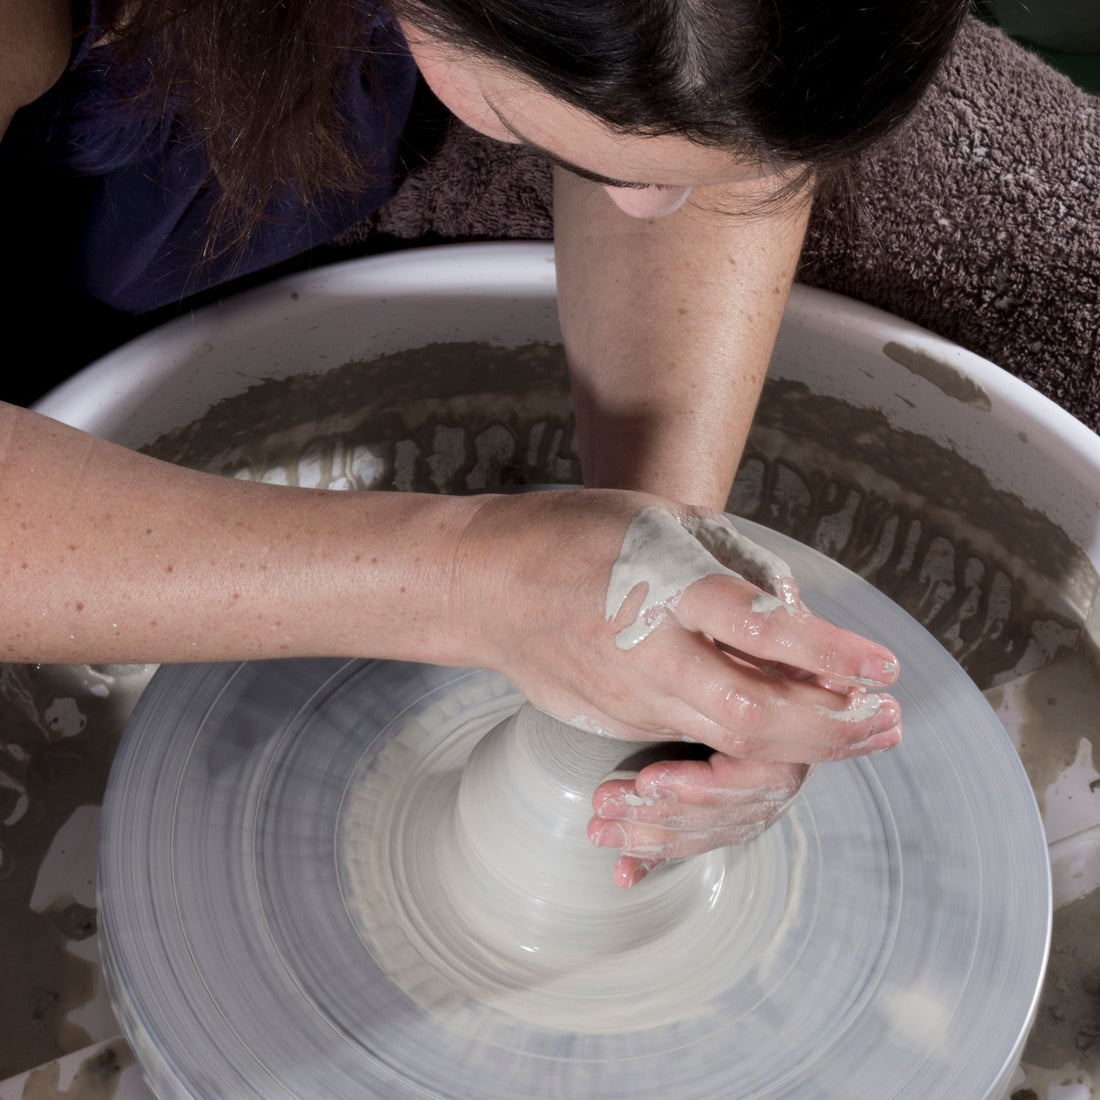 Traditional Pottery Making - Mad About Pottery